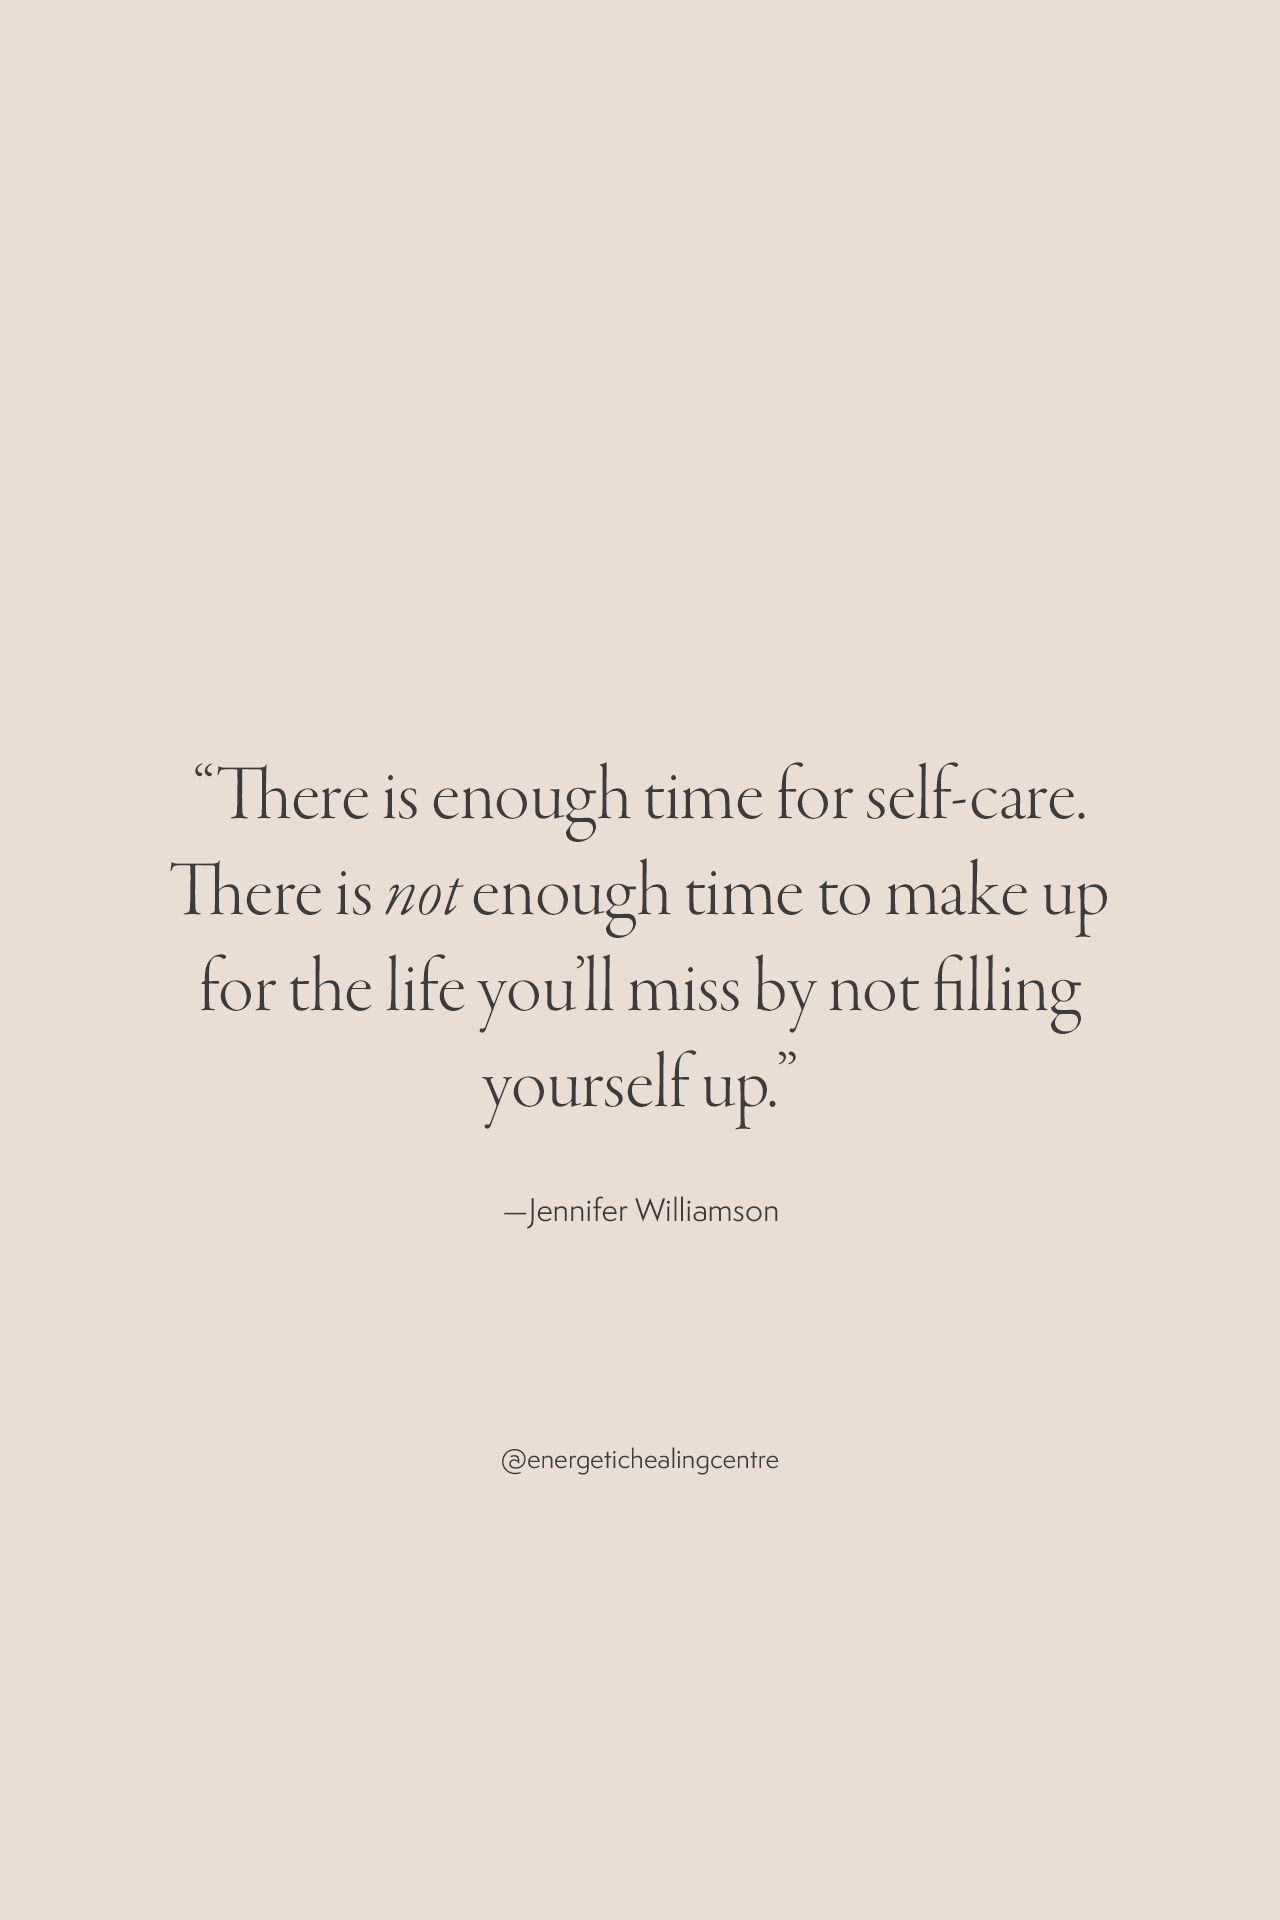 There is enough time for self care - quotes on self care